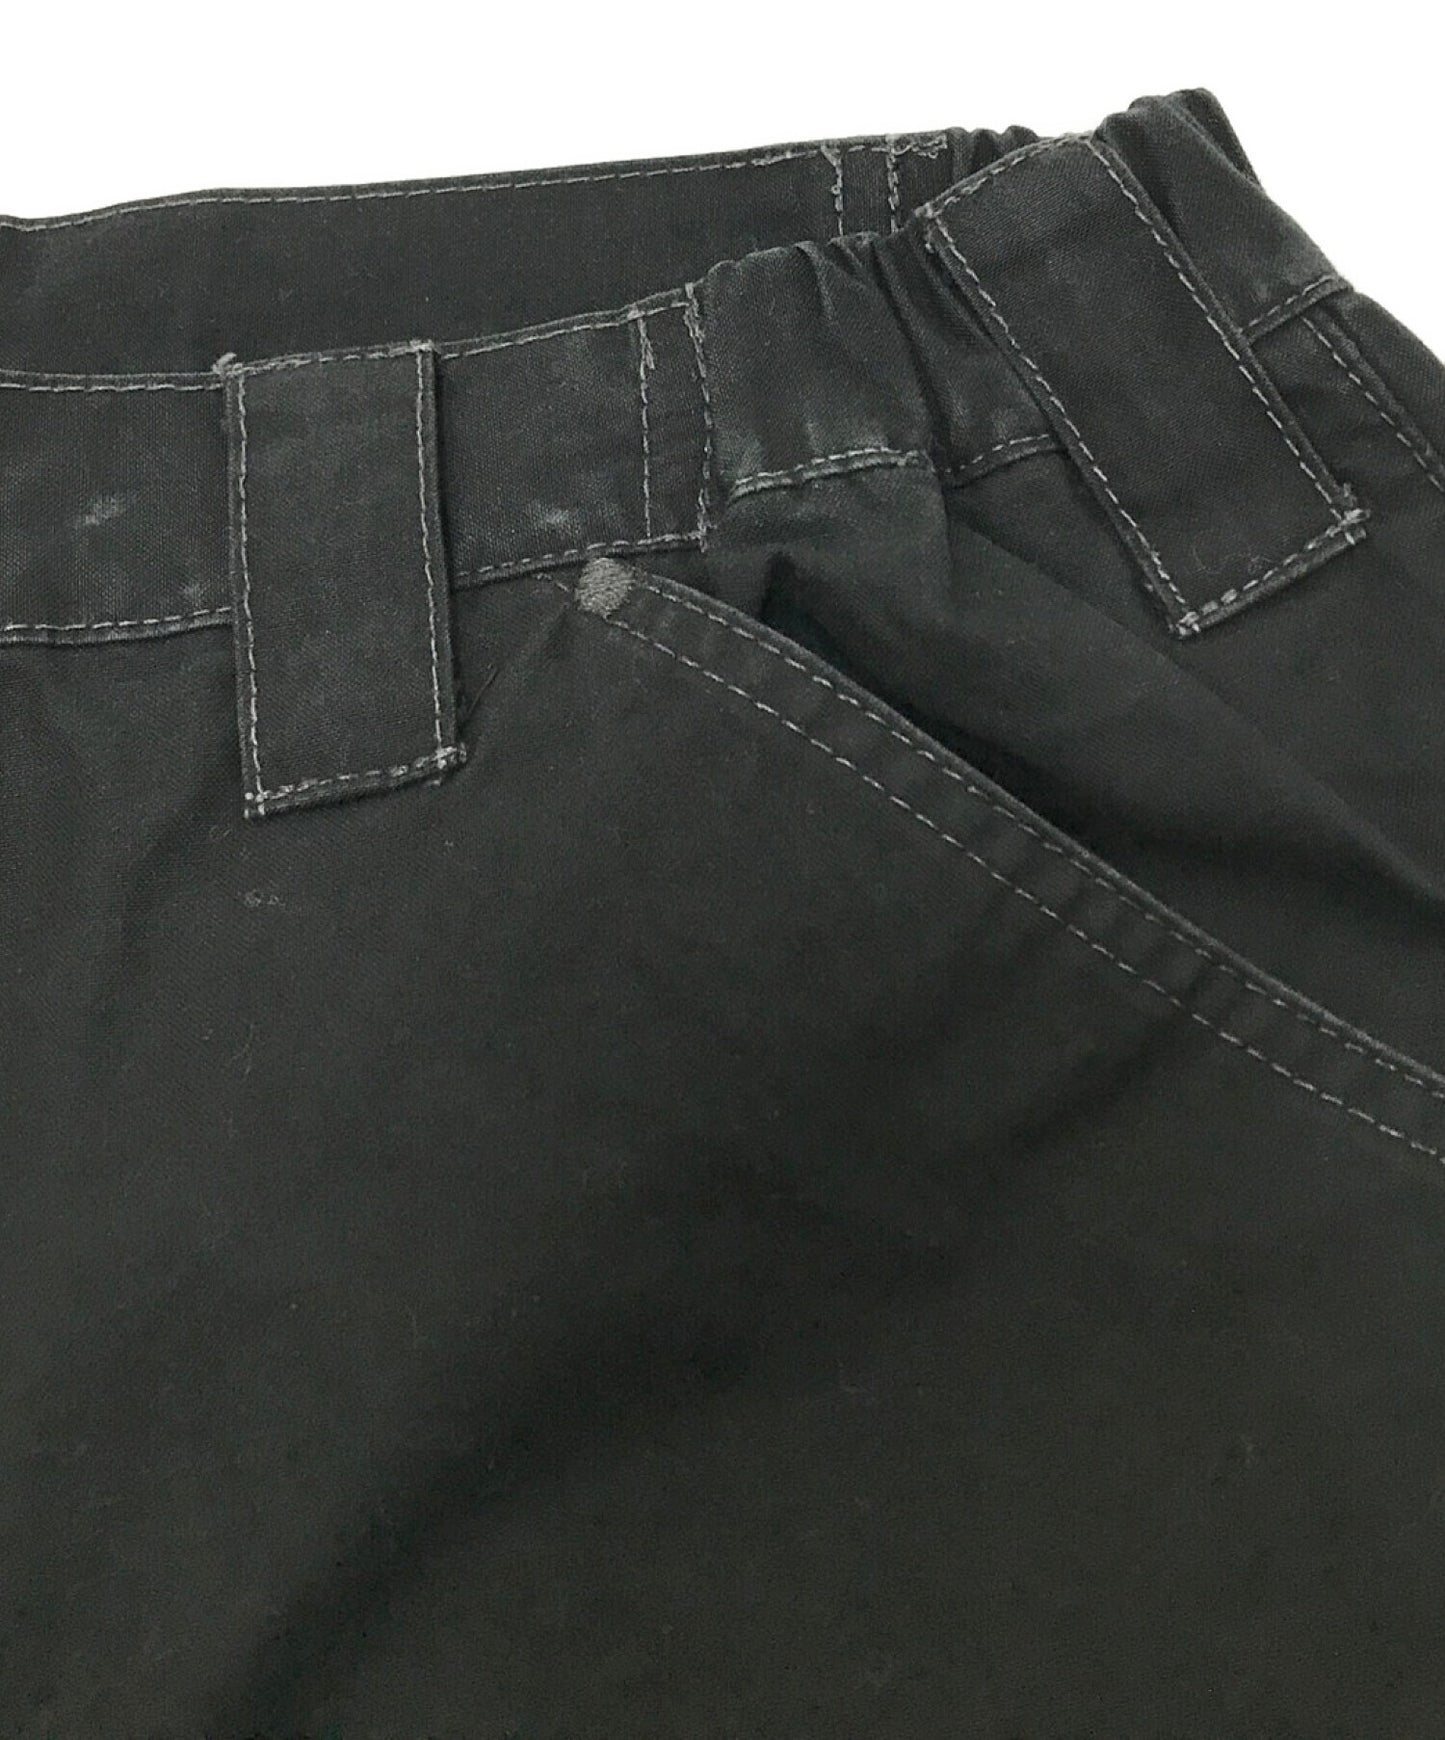 [Pre-owned] Y'S YOHJI YAMAMOTO Stitching Wide Pants Product dyed Stitching Embroidery Work Archive Popularity MN-P25-059